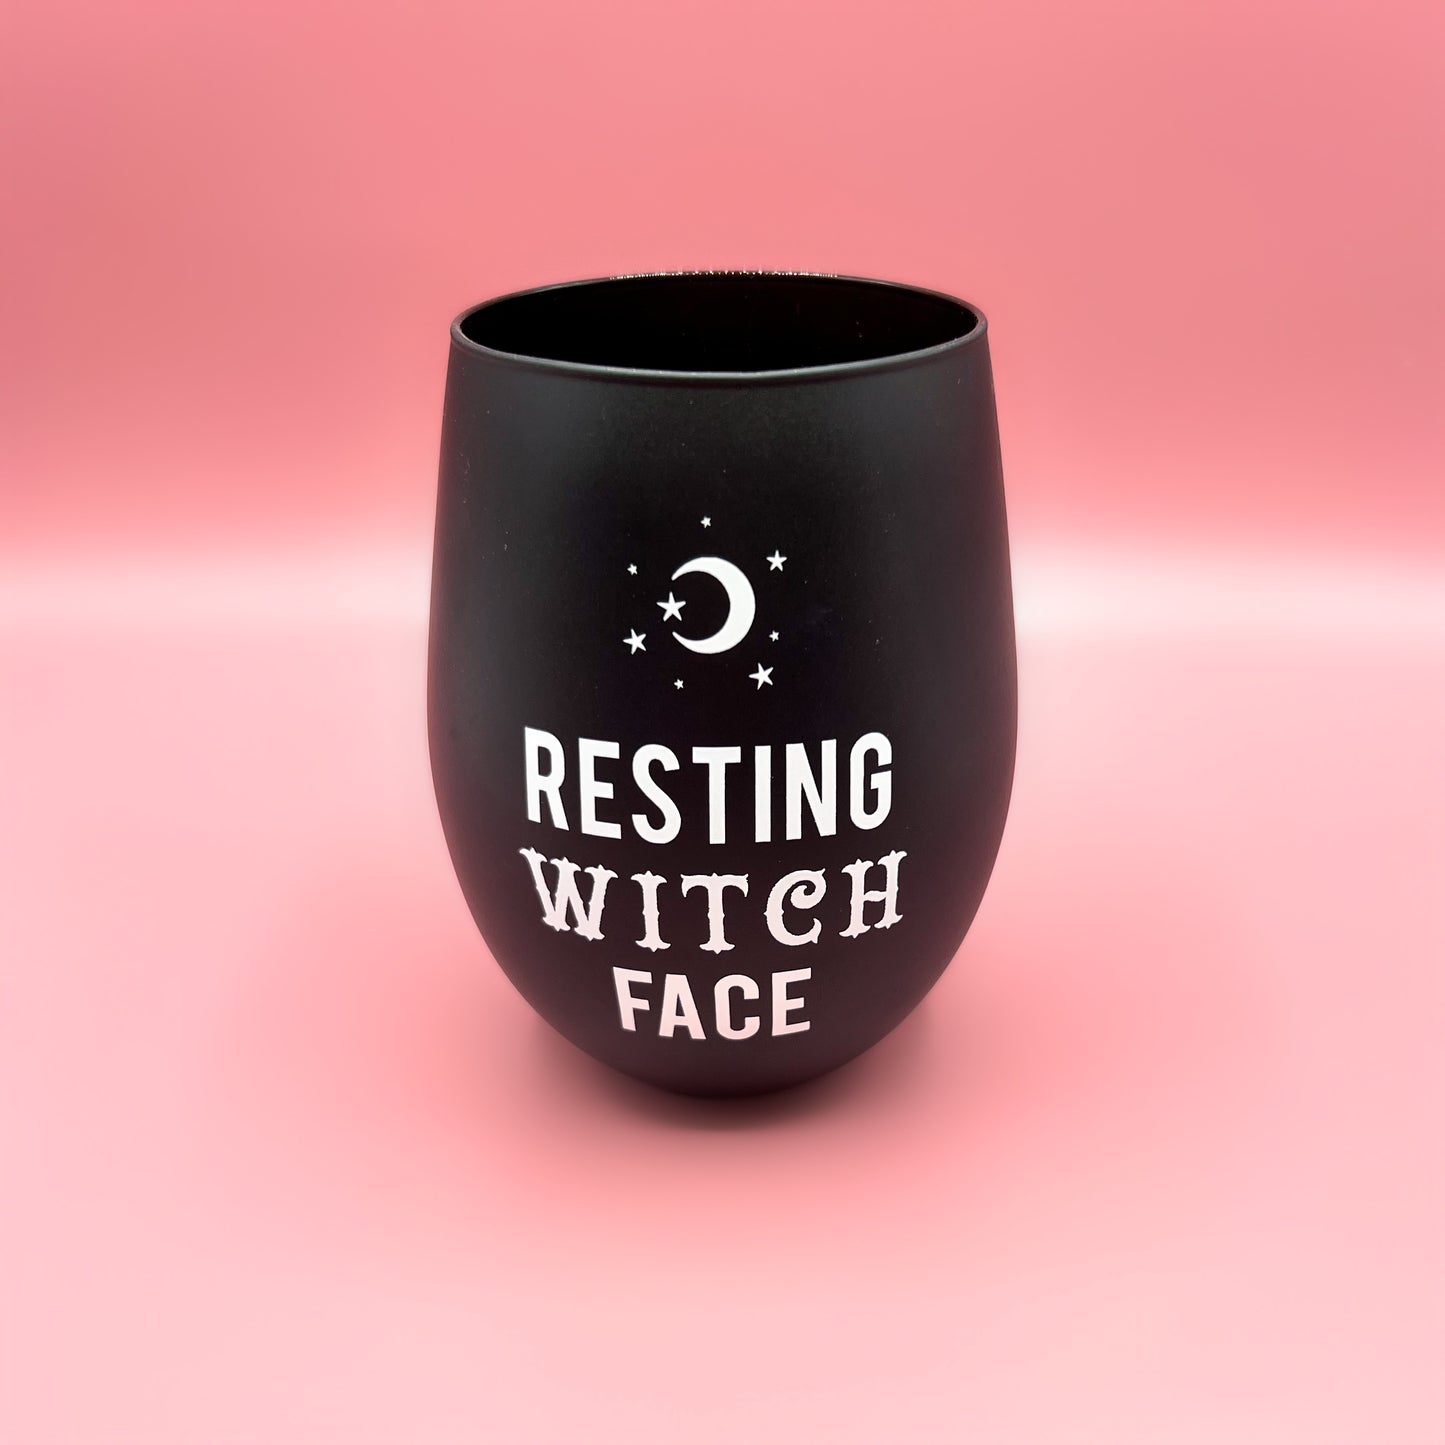 Resting Witch Face stemless wine glass